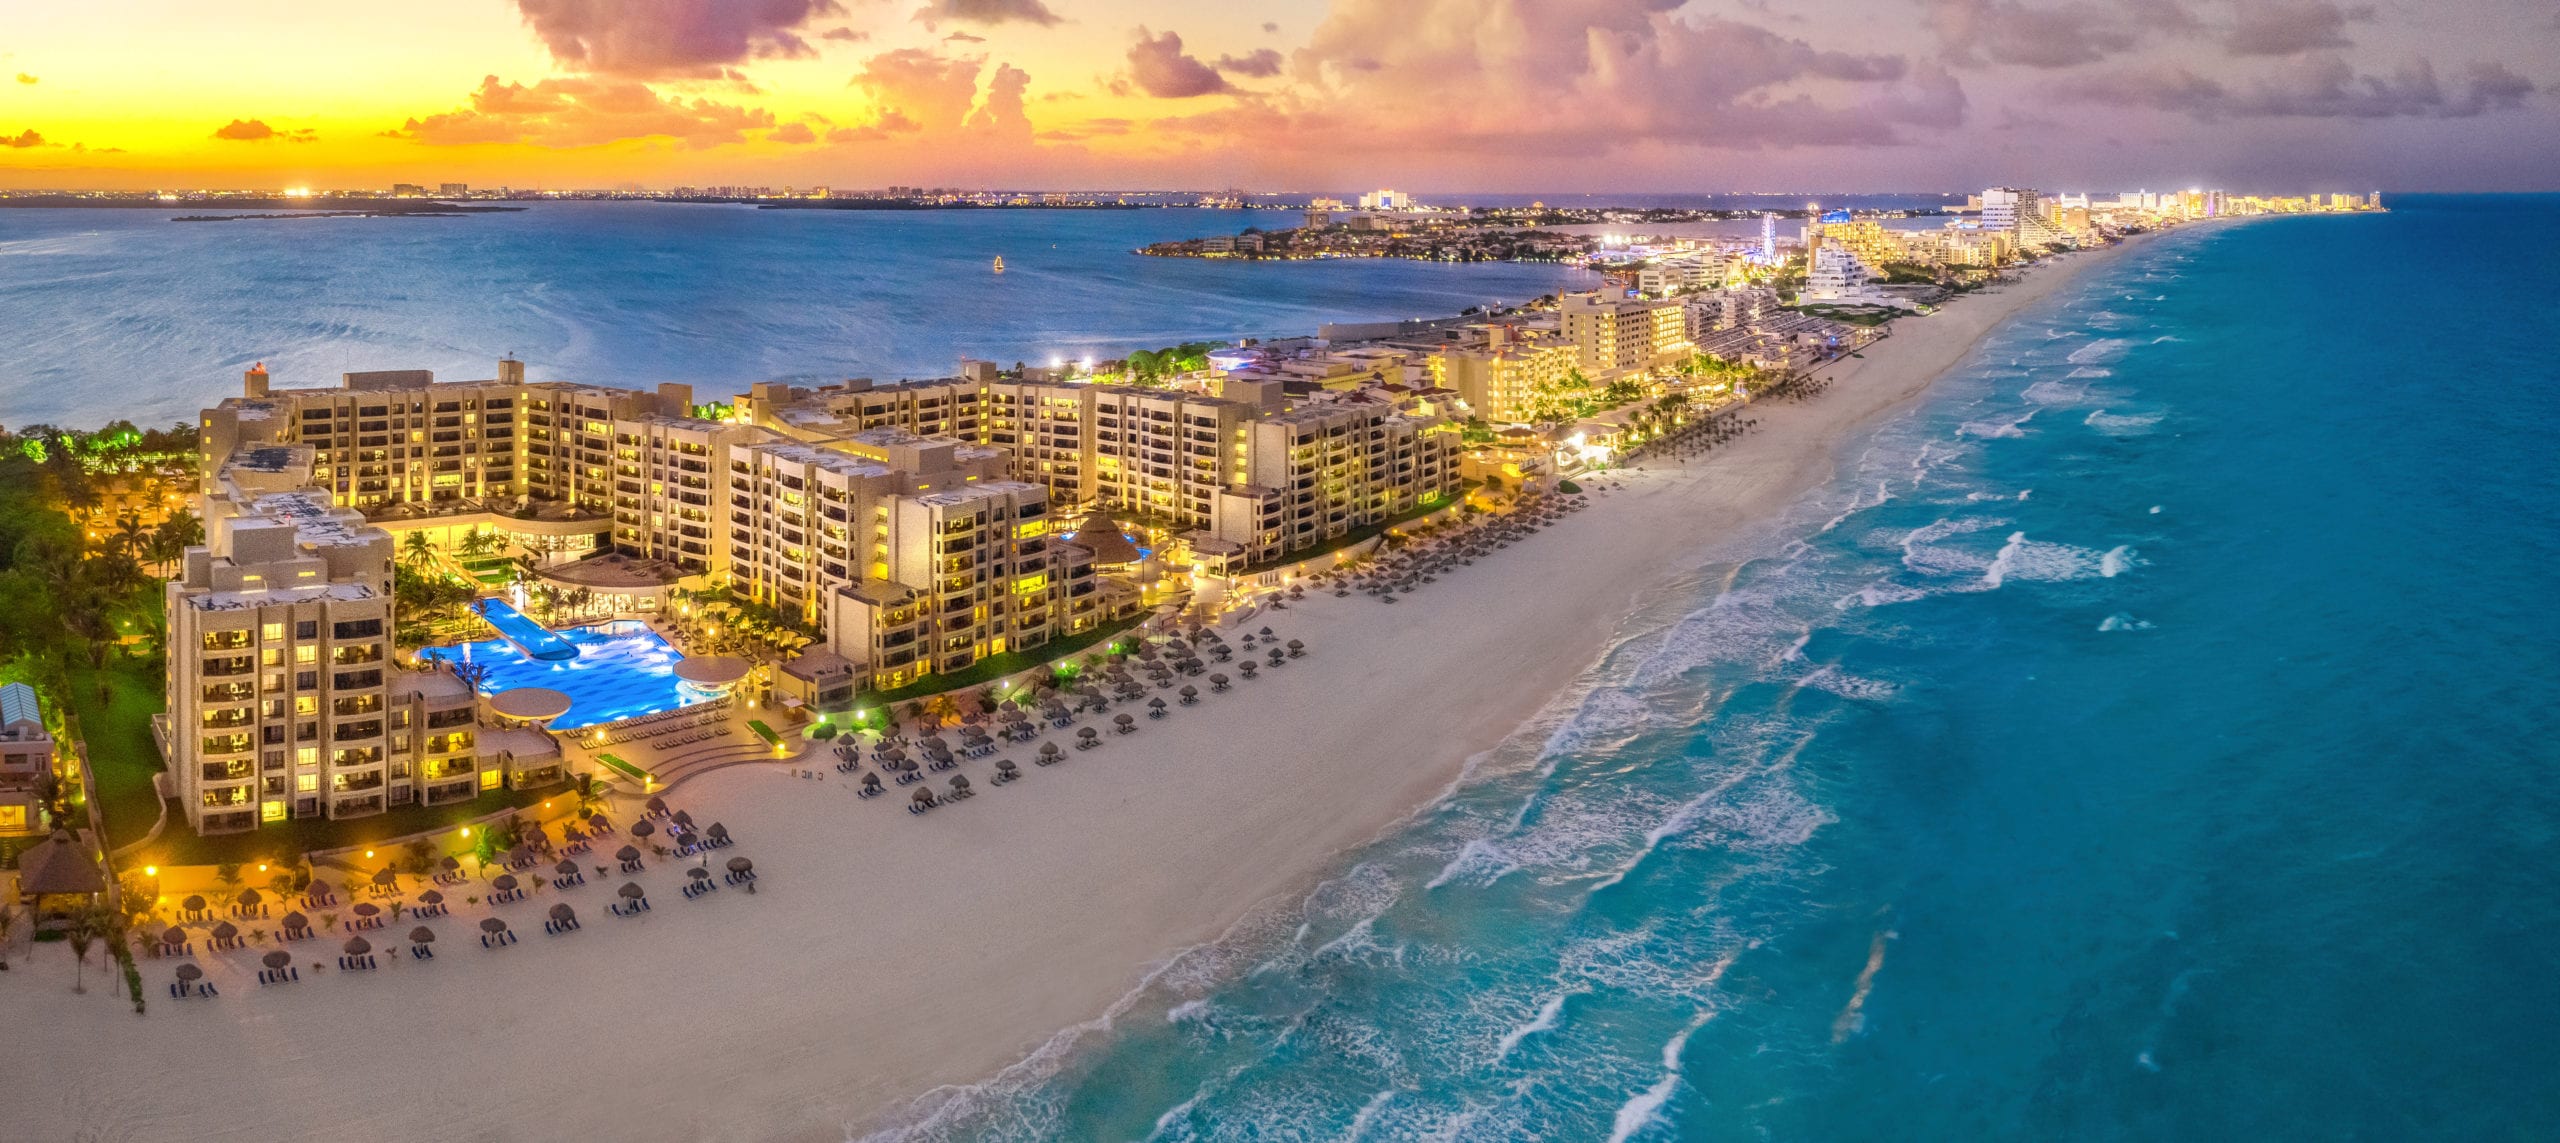 10 Best Mexico All-Inclusive Family Resorts (2021) - FamilyVacationist